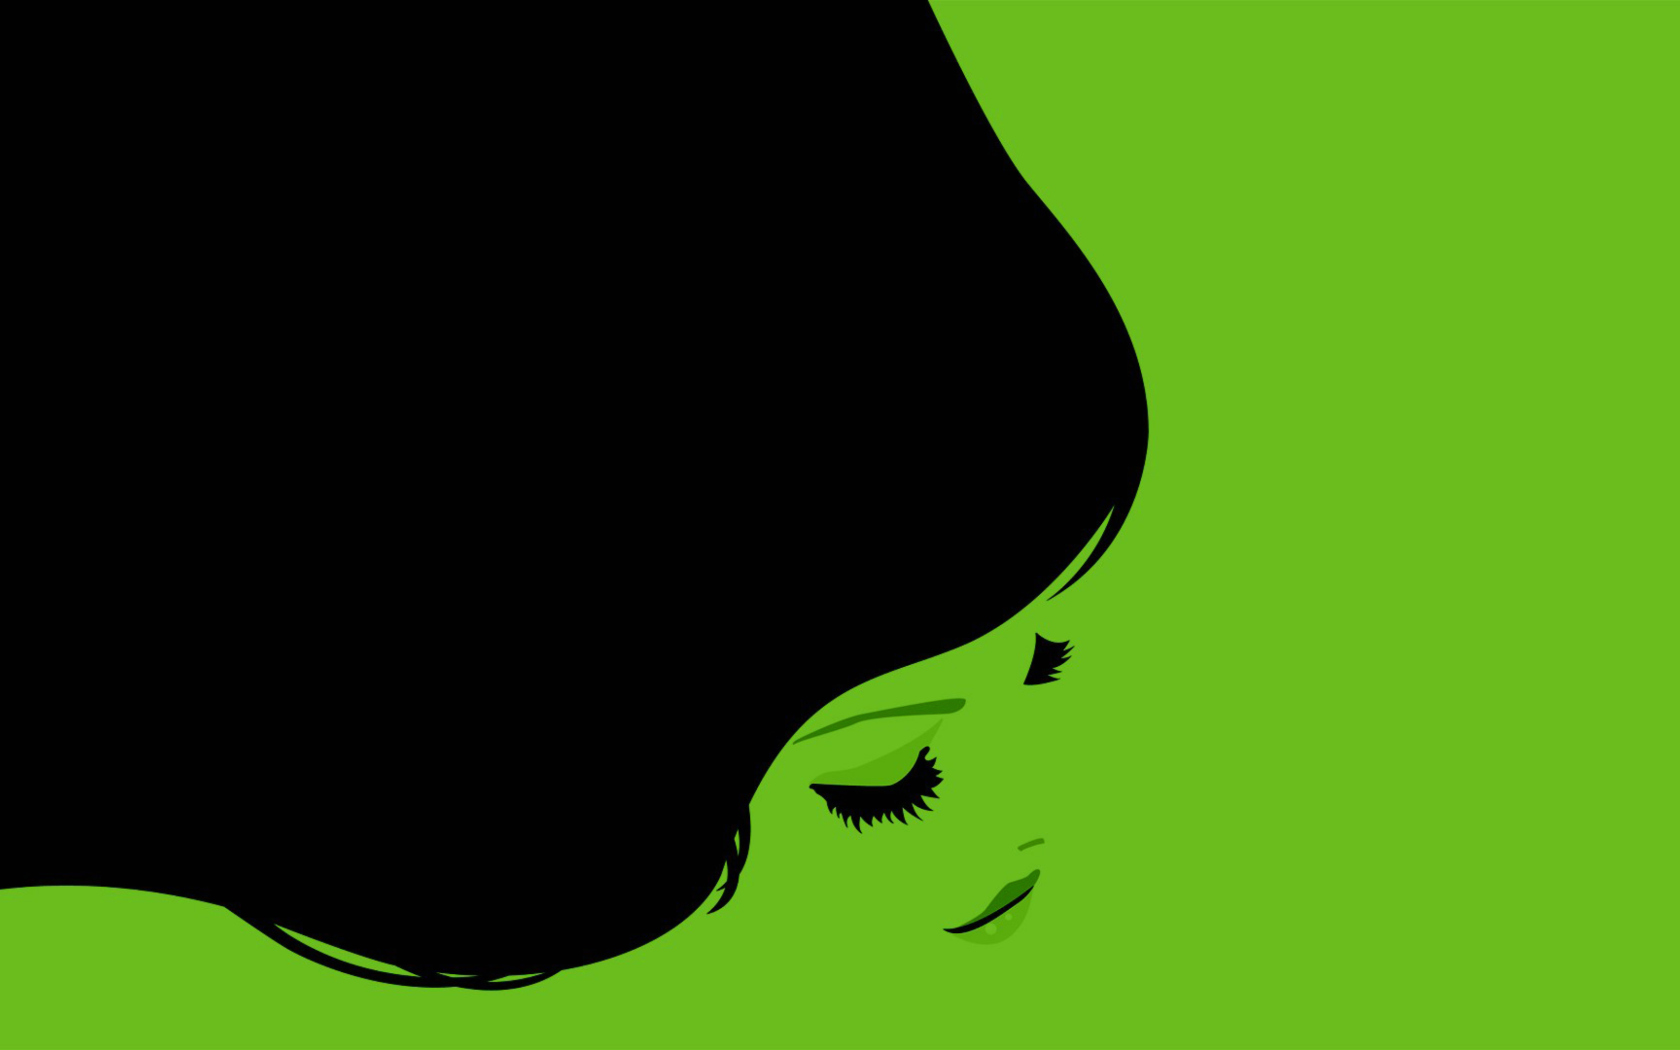 Girl's Face On Green Background wallpaper 1680x1050